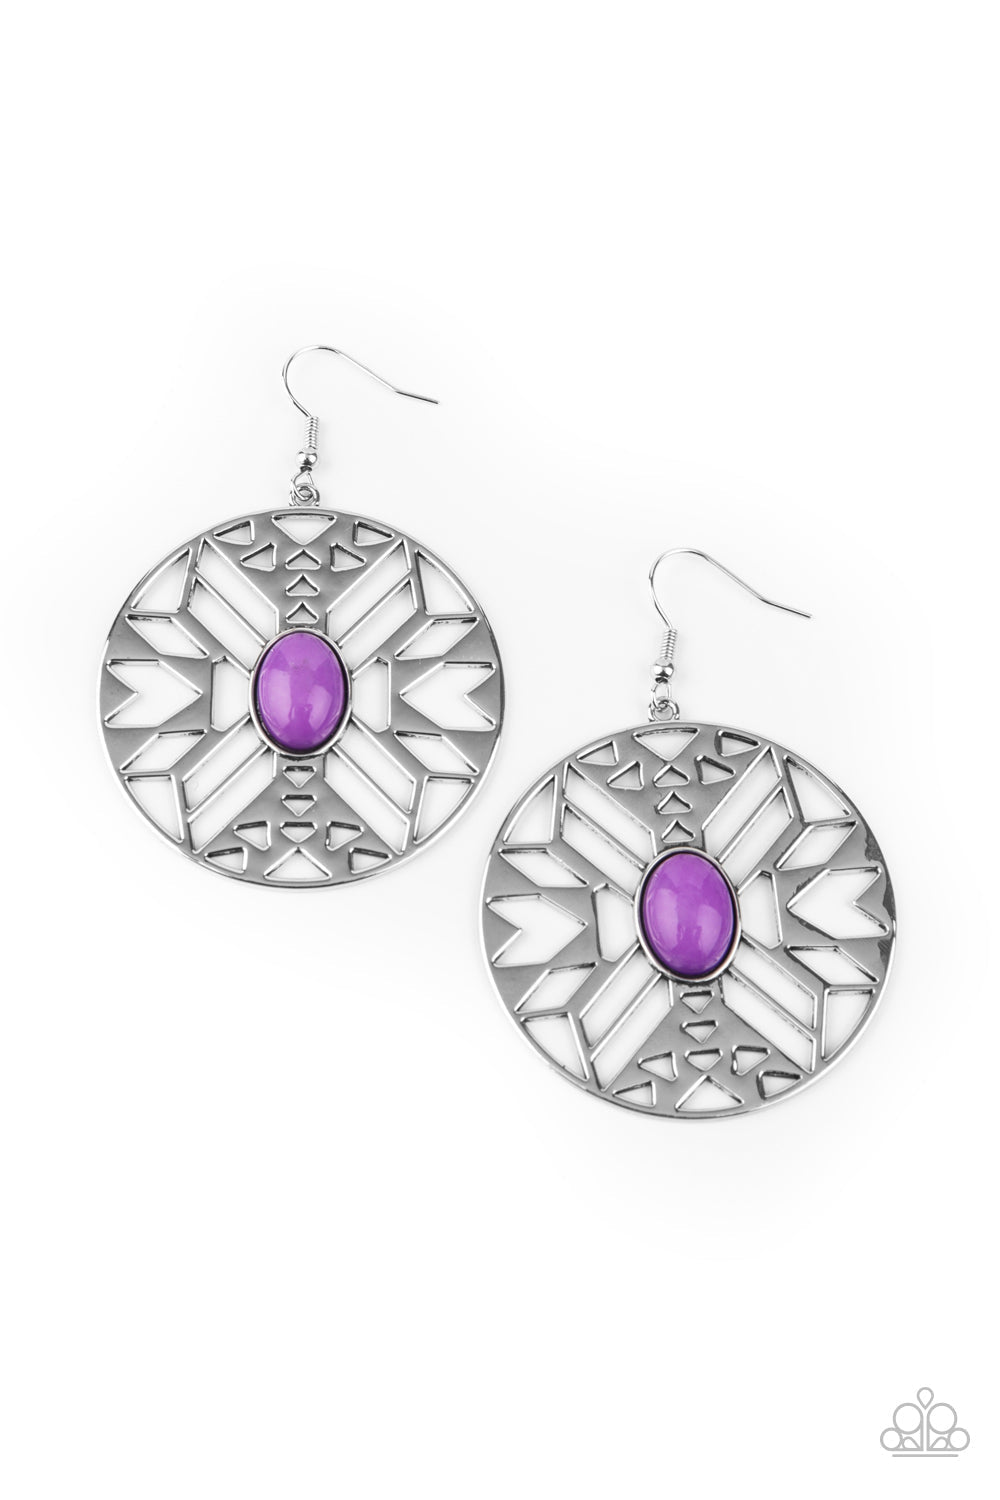 Southwest Walkabout - Purple and Silver Earrings - Paparazzi Accessories - An oval purple bead adorns the center of a round silver frame radiating with an airy southwestern inspired pattern for a whimsical look. Earring attaches to a standard fishhook fitting. Sold as one pair of earrings.